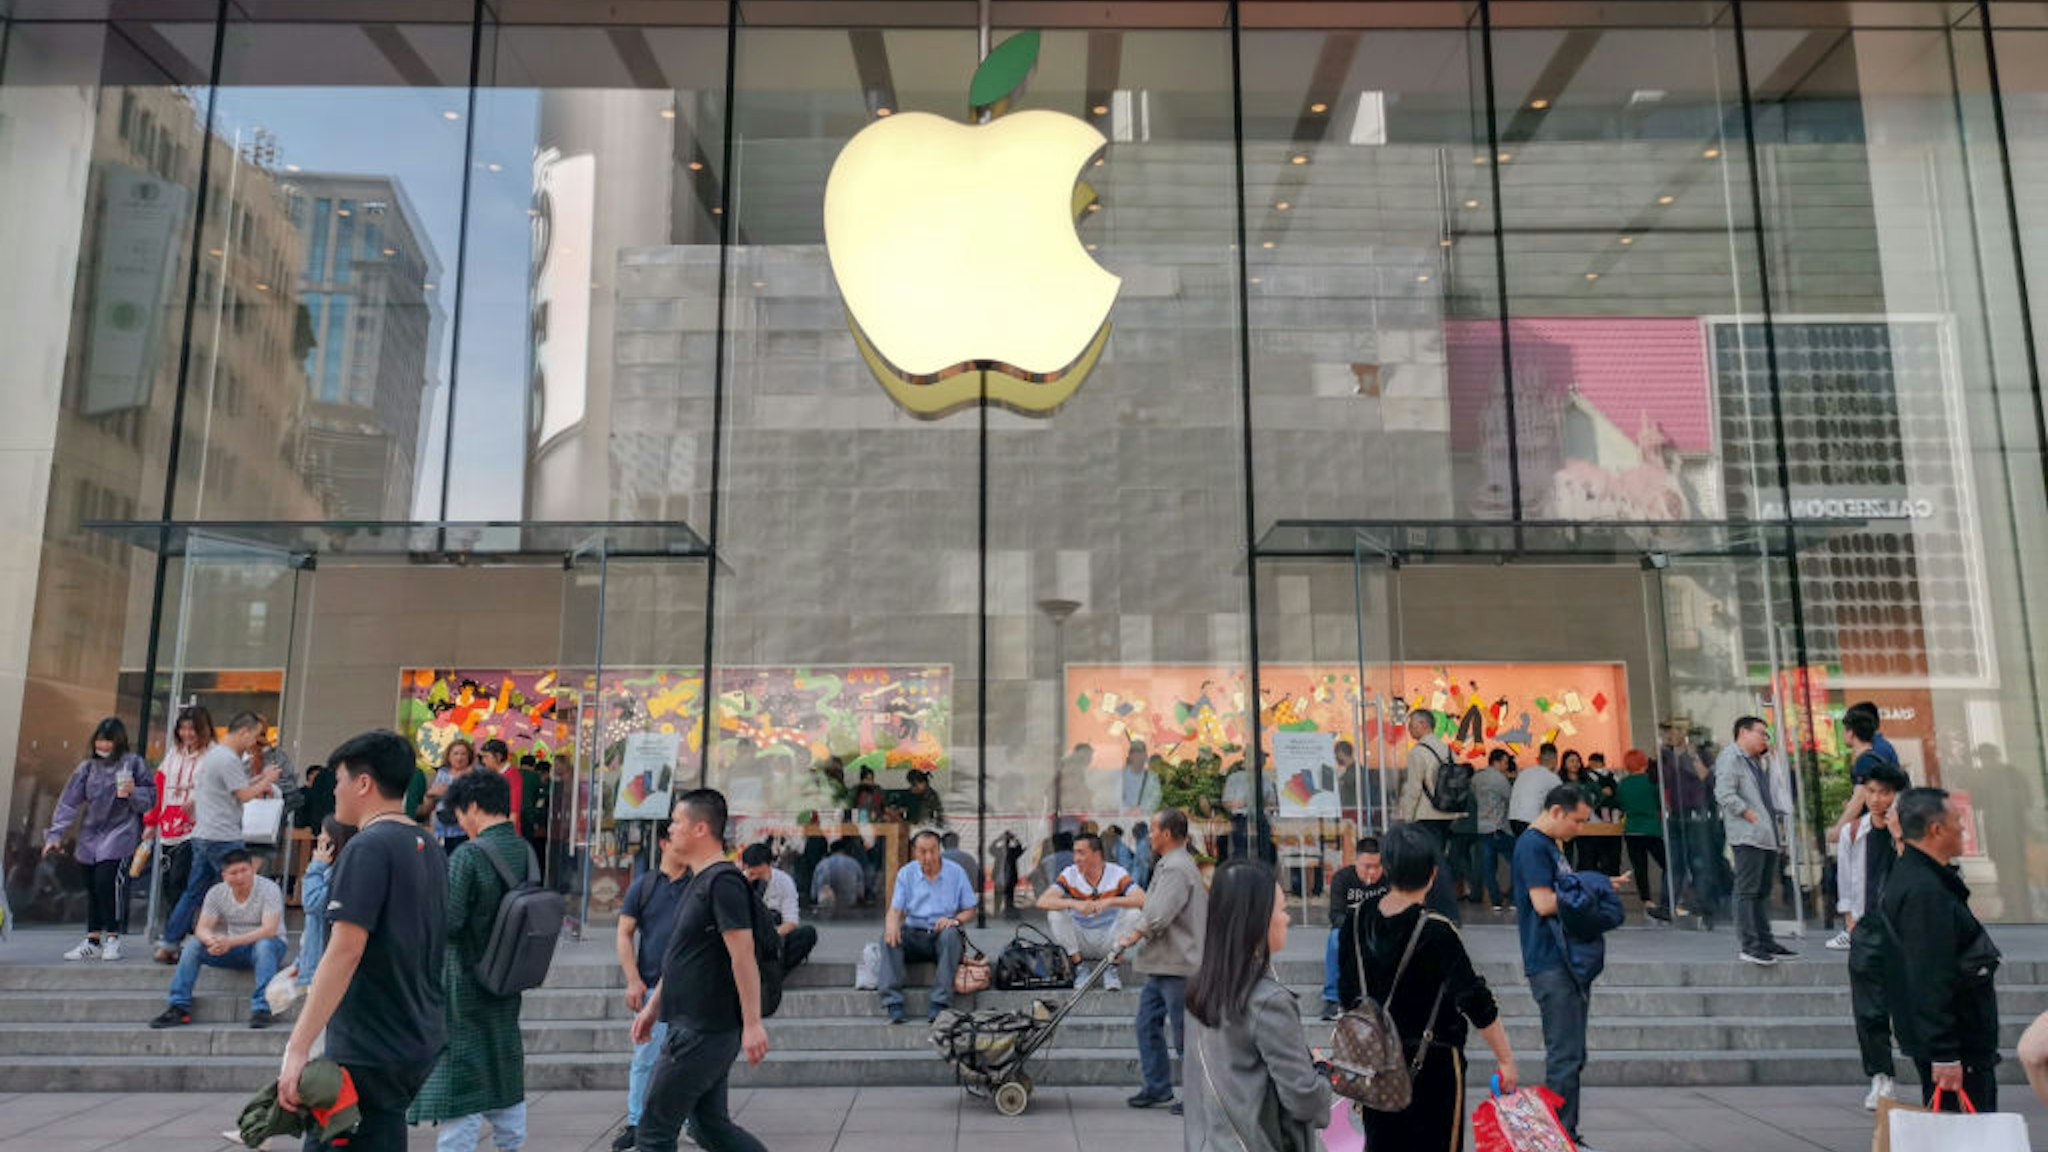 Apple Store Welcomes Earth Day